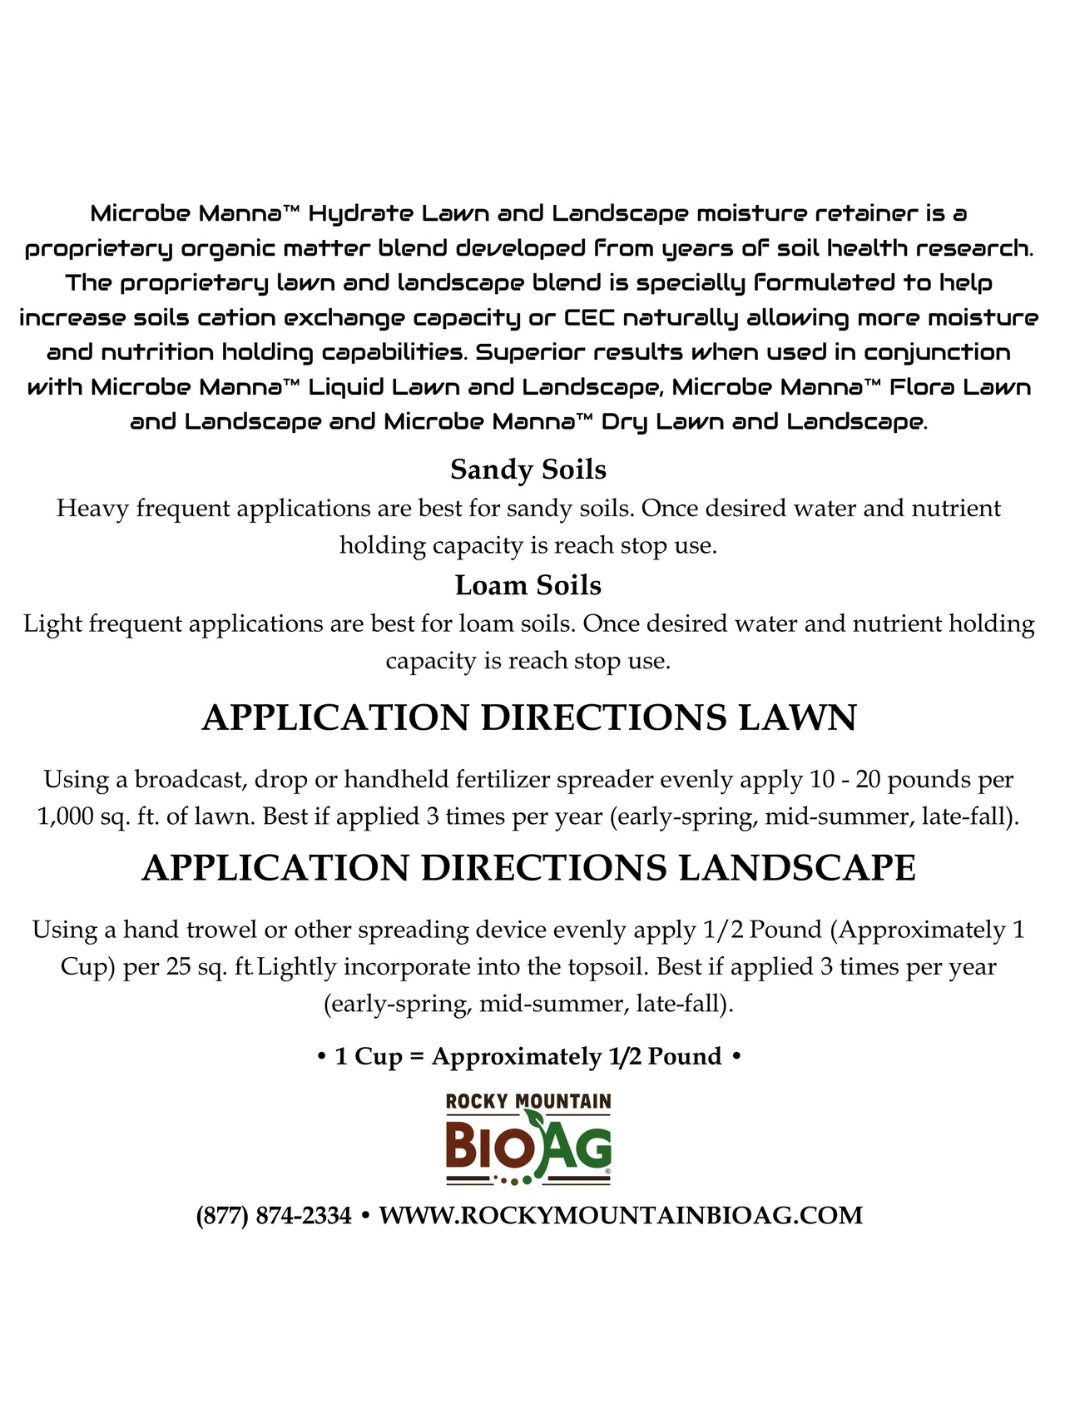 Microbe Manna™ Hydrate Lawn and Landscape back label Rocky Mountain BioAg®